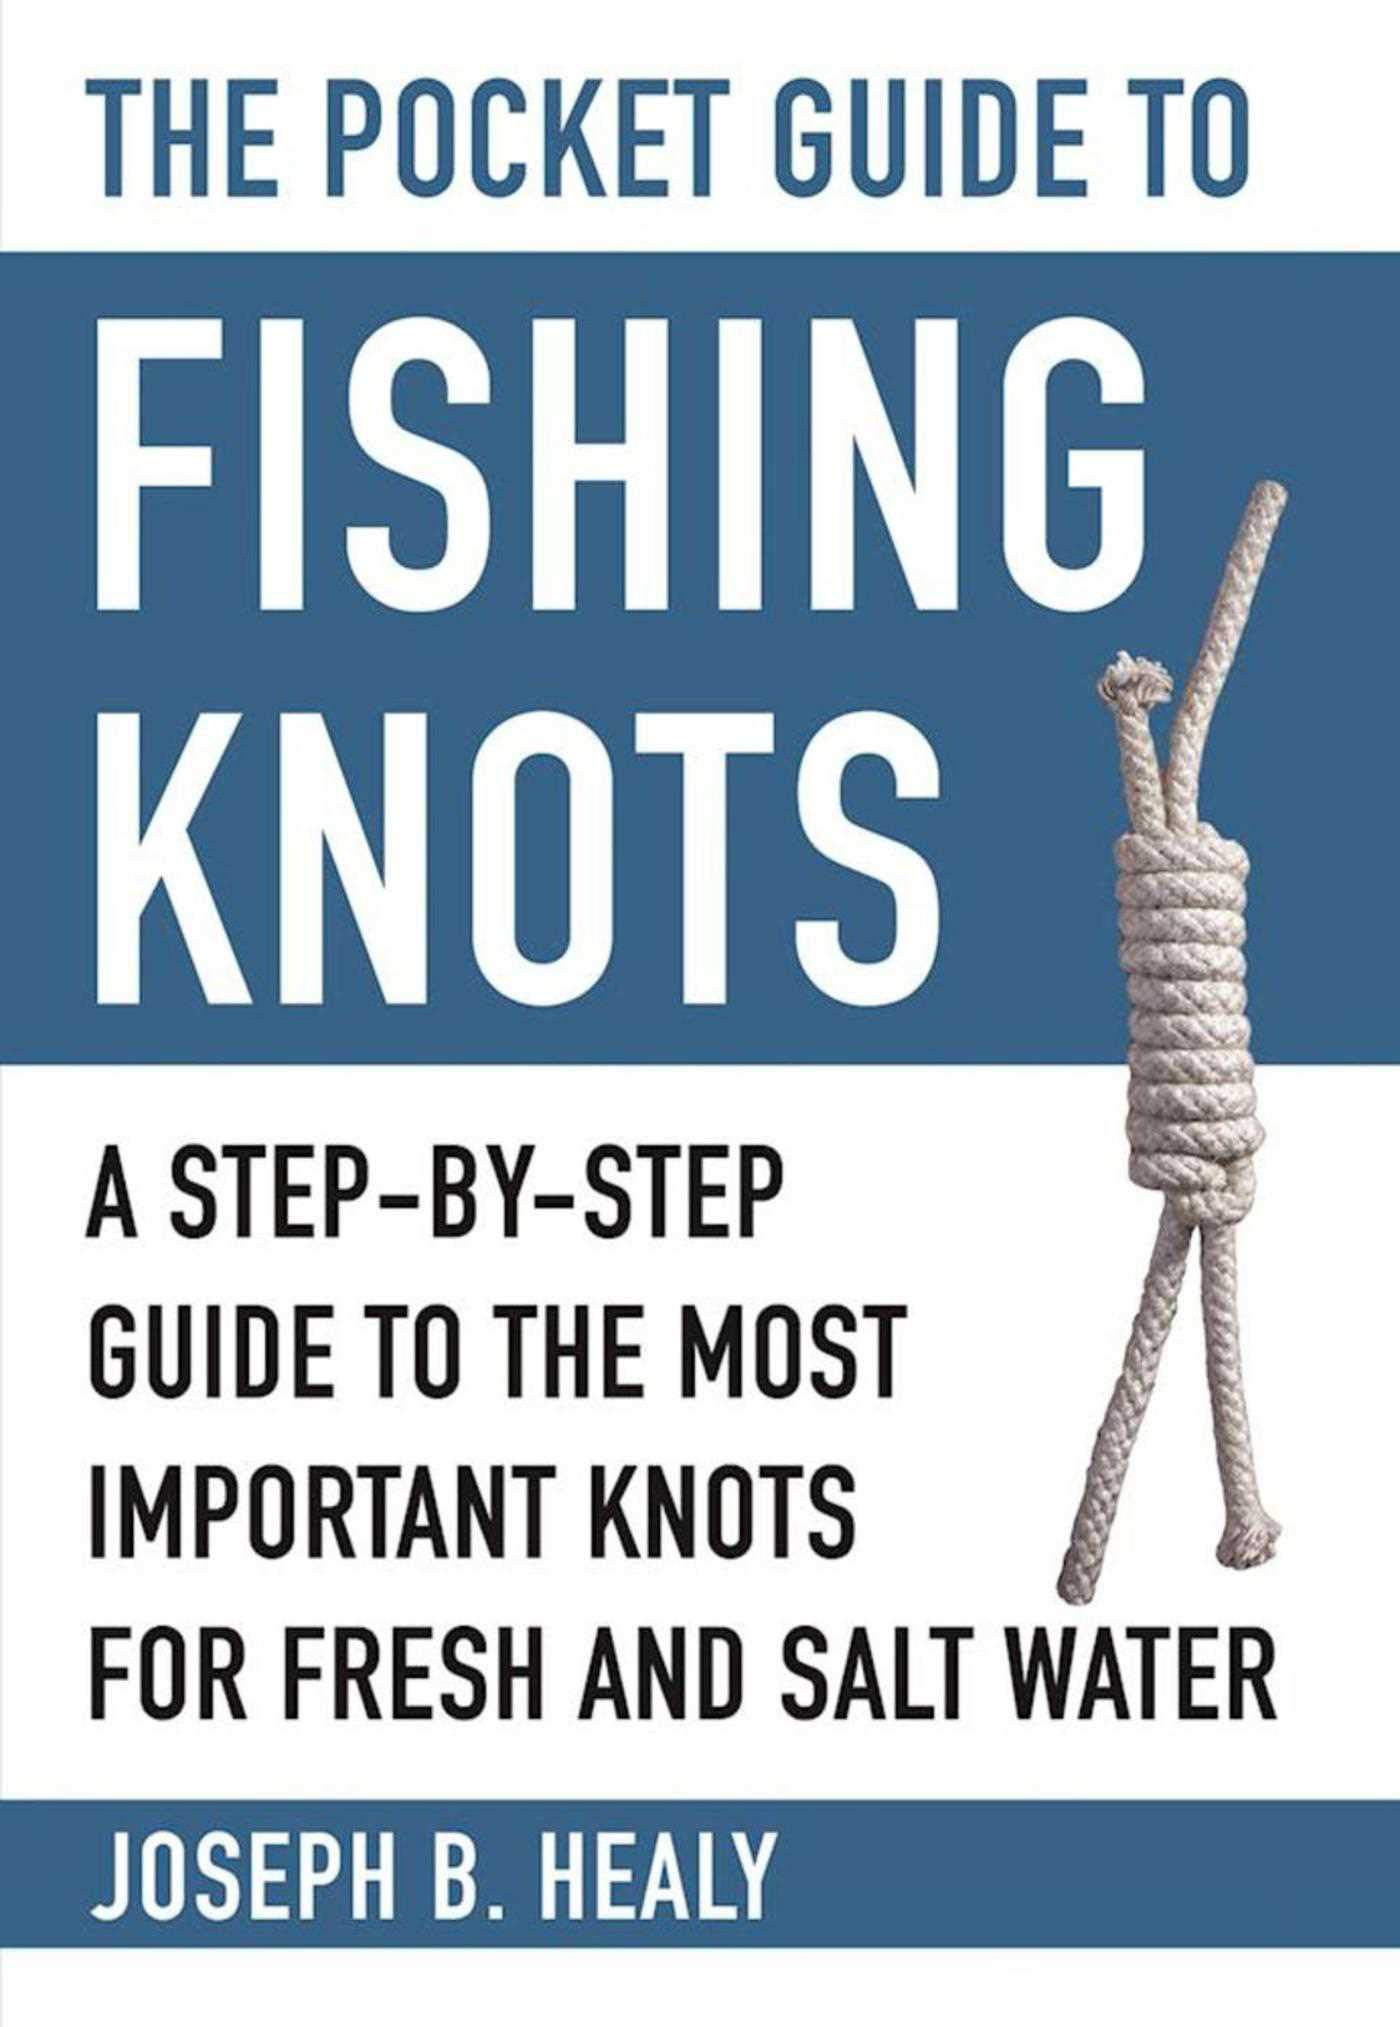 Nautical Books :: Boating Skills & How-To :: Knots, Canvaswork & Rigging ::  The Pocket Guide to Fishing Knots: A Step-by-Step Guide to the Most  Important Knots for Fresh and Salt Water